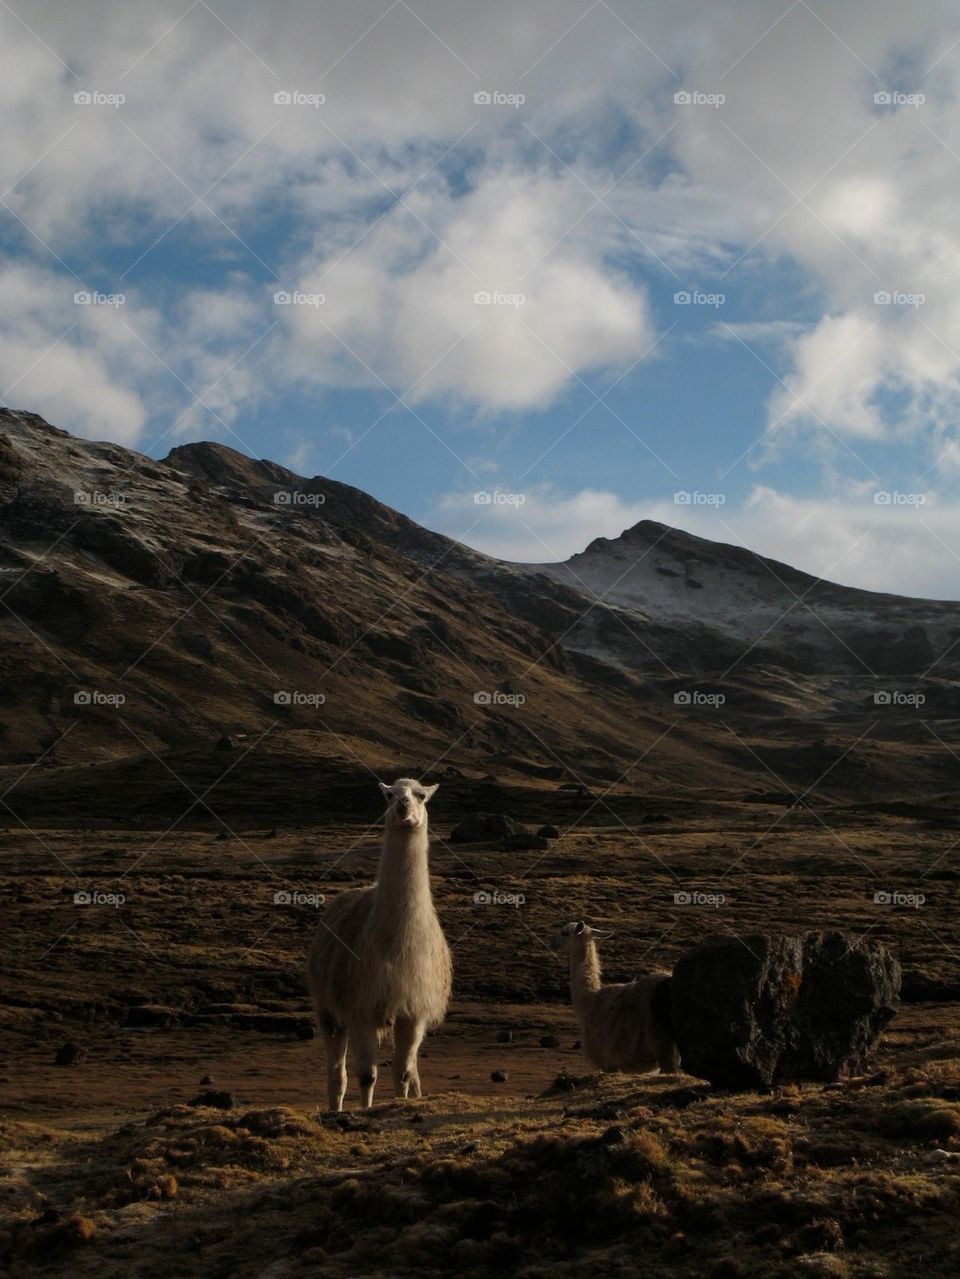 Llama of The Andes